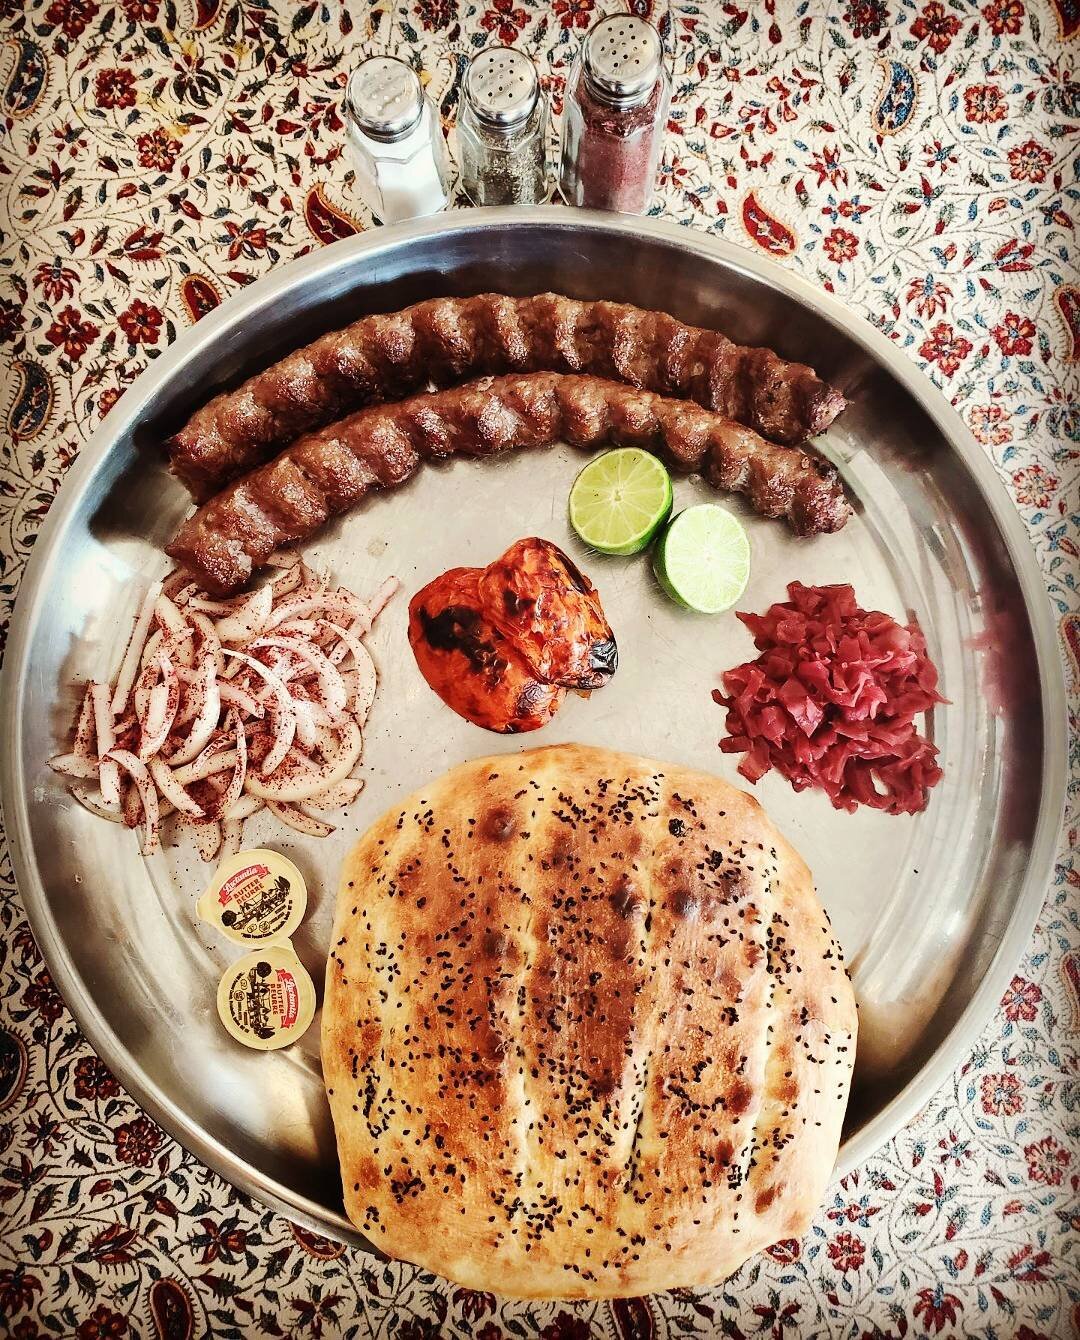 Our kebab tray with our in-house made bread is coming soon!
Stay tuned!
#shop124street  #shoplocal  #yegfood  #yegbakery  #yeglocal  #edmontonliving  #yegbusiness  #kabab